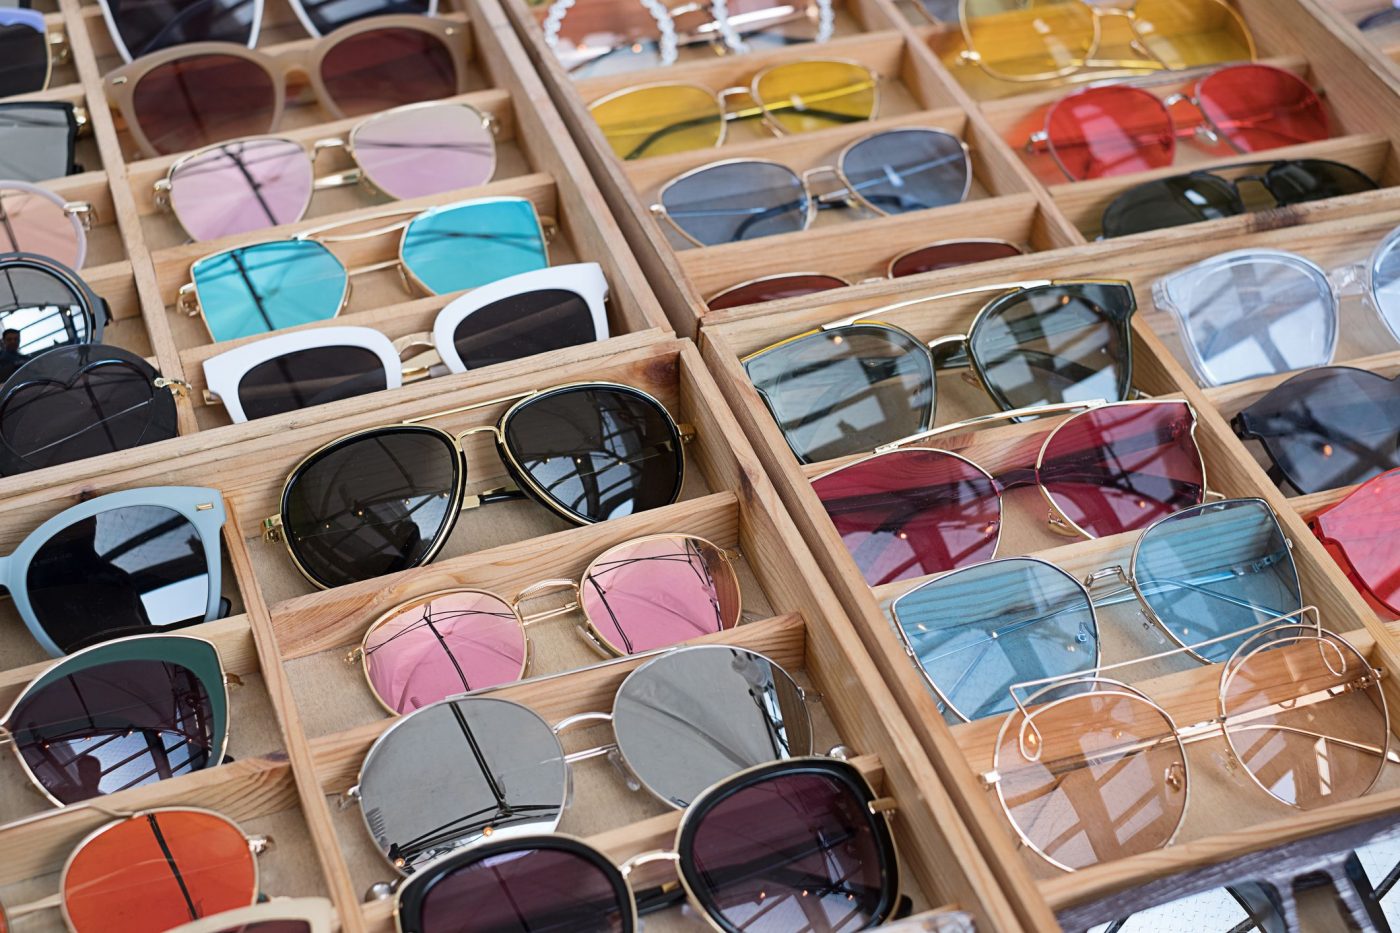 high-angle-view-of-colorful-sunglasses-for-sale-in-royalty-free-image-979123212-1558323960